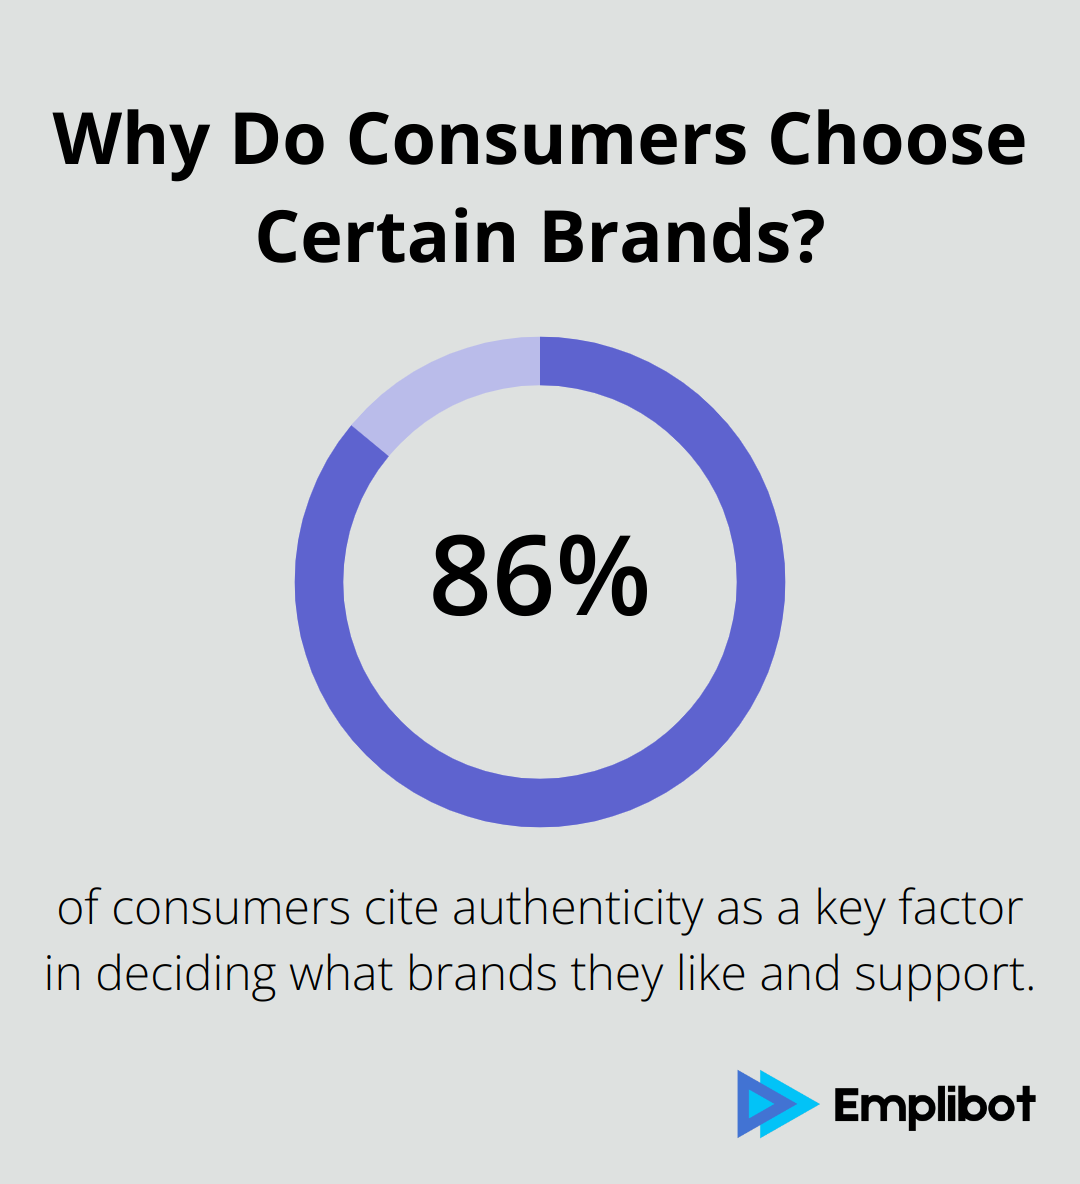 Why Do Consumers Choose Certain Brands?